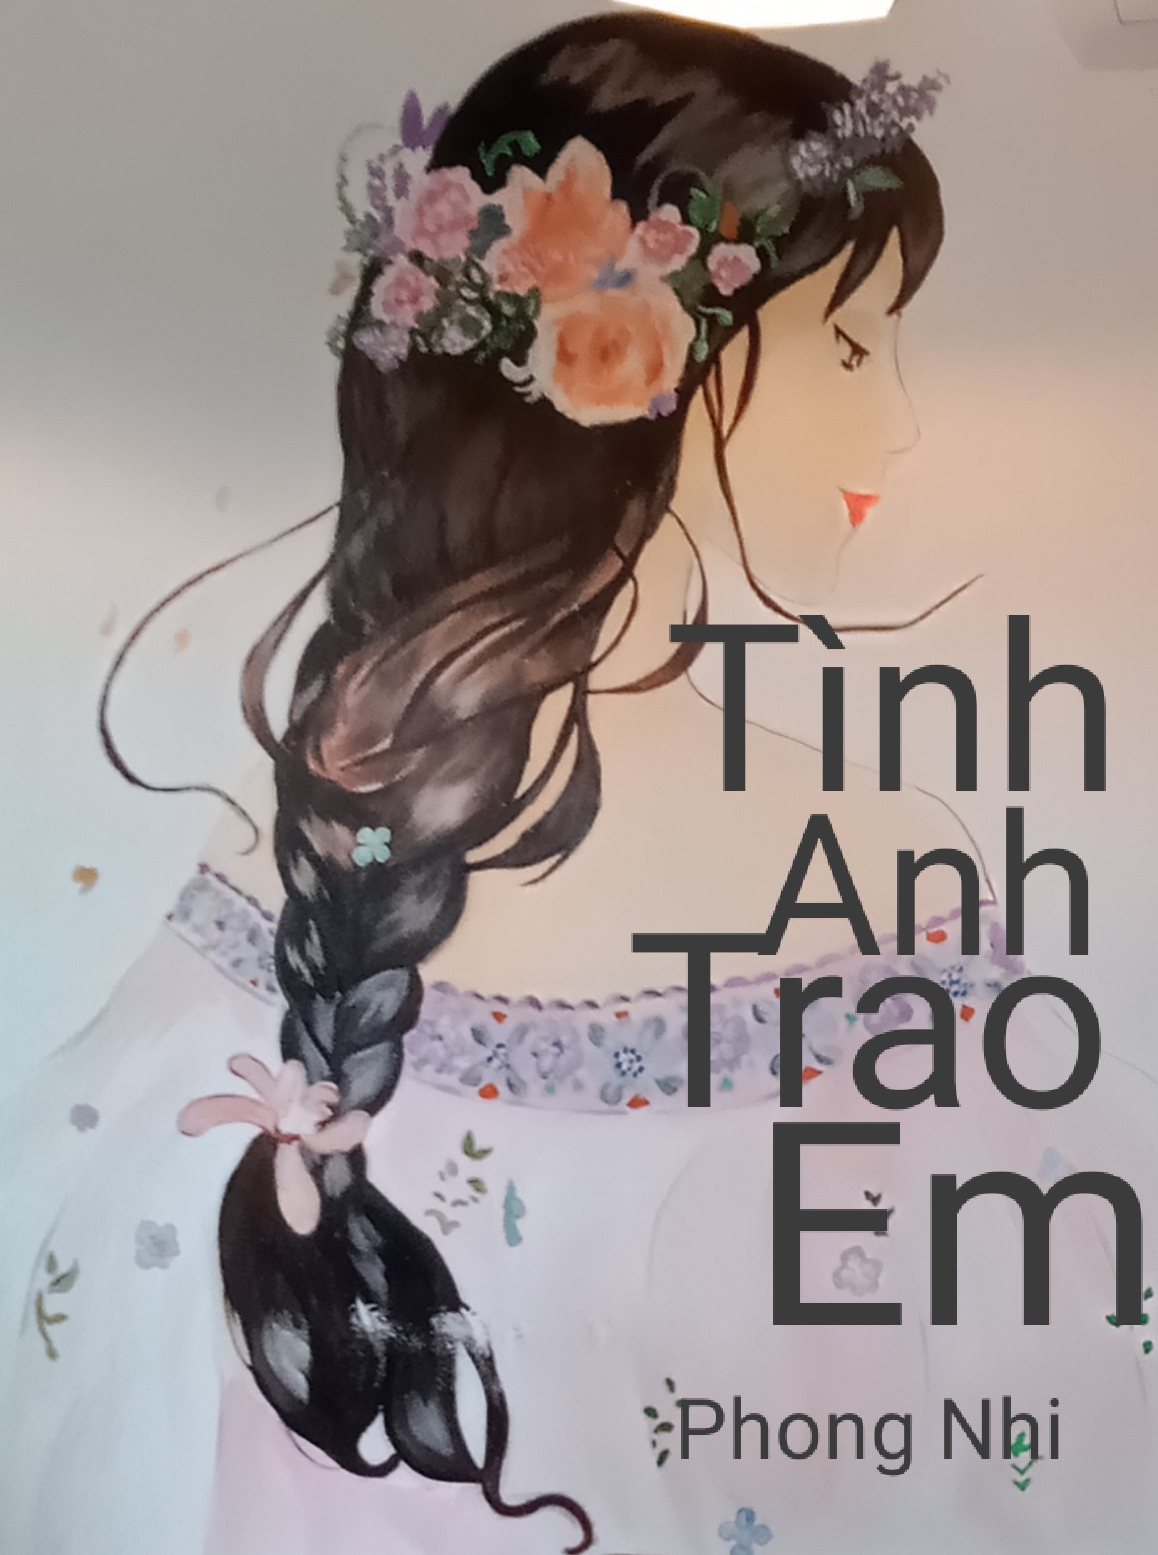 amanda michelle sallee recommends tinh anh trao em pic